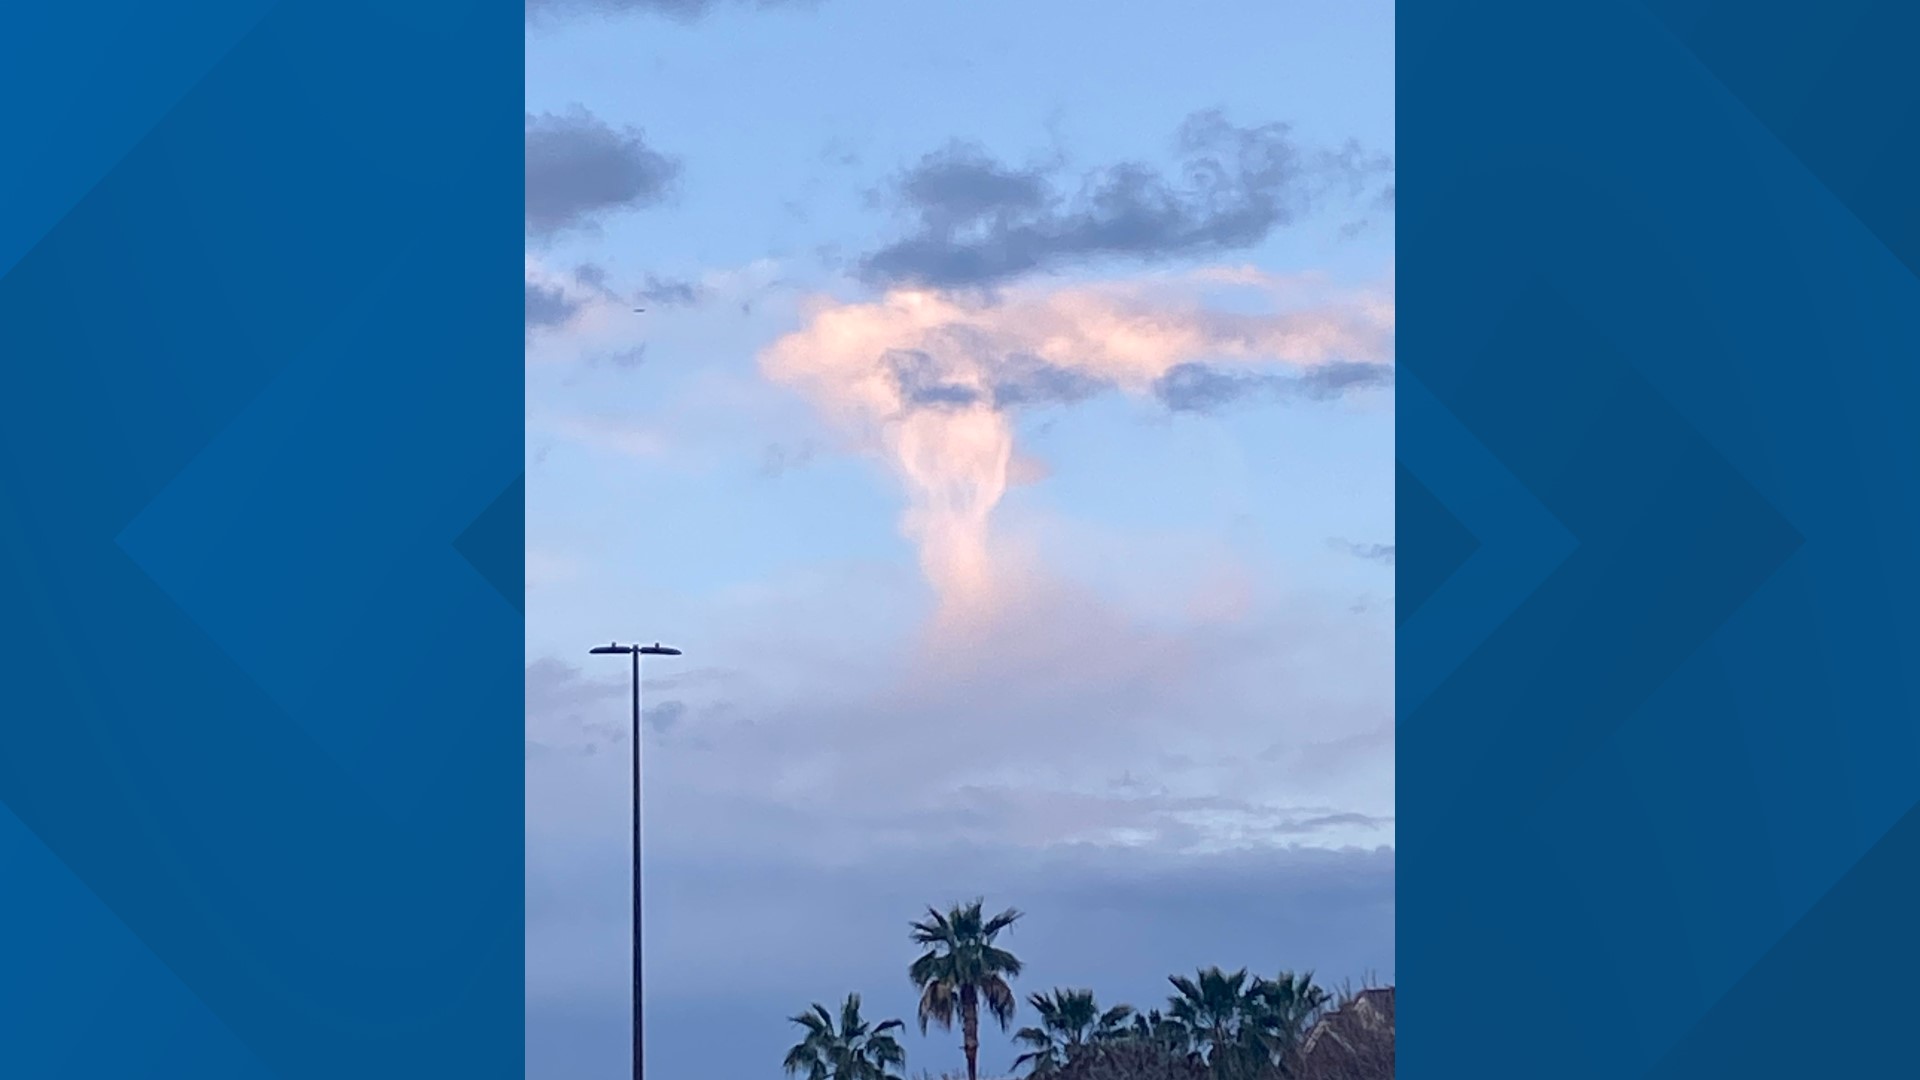 Have you ever heard of a 'streamer shower'? One 12News viewer saw the formation in the skies over Arizona, and meteorologist Ginger Jeffries explains what it is.